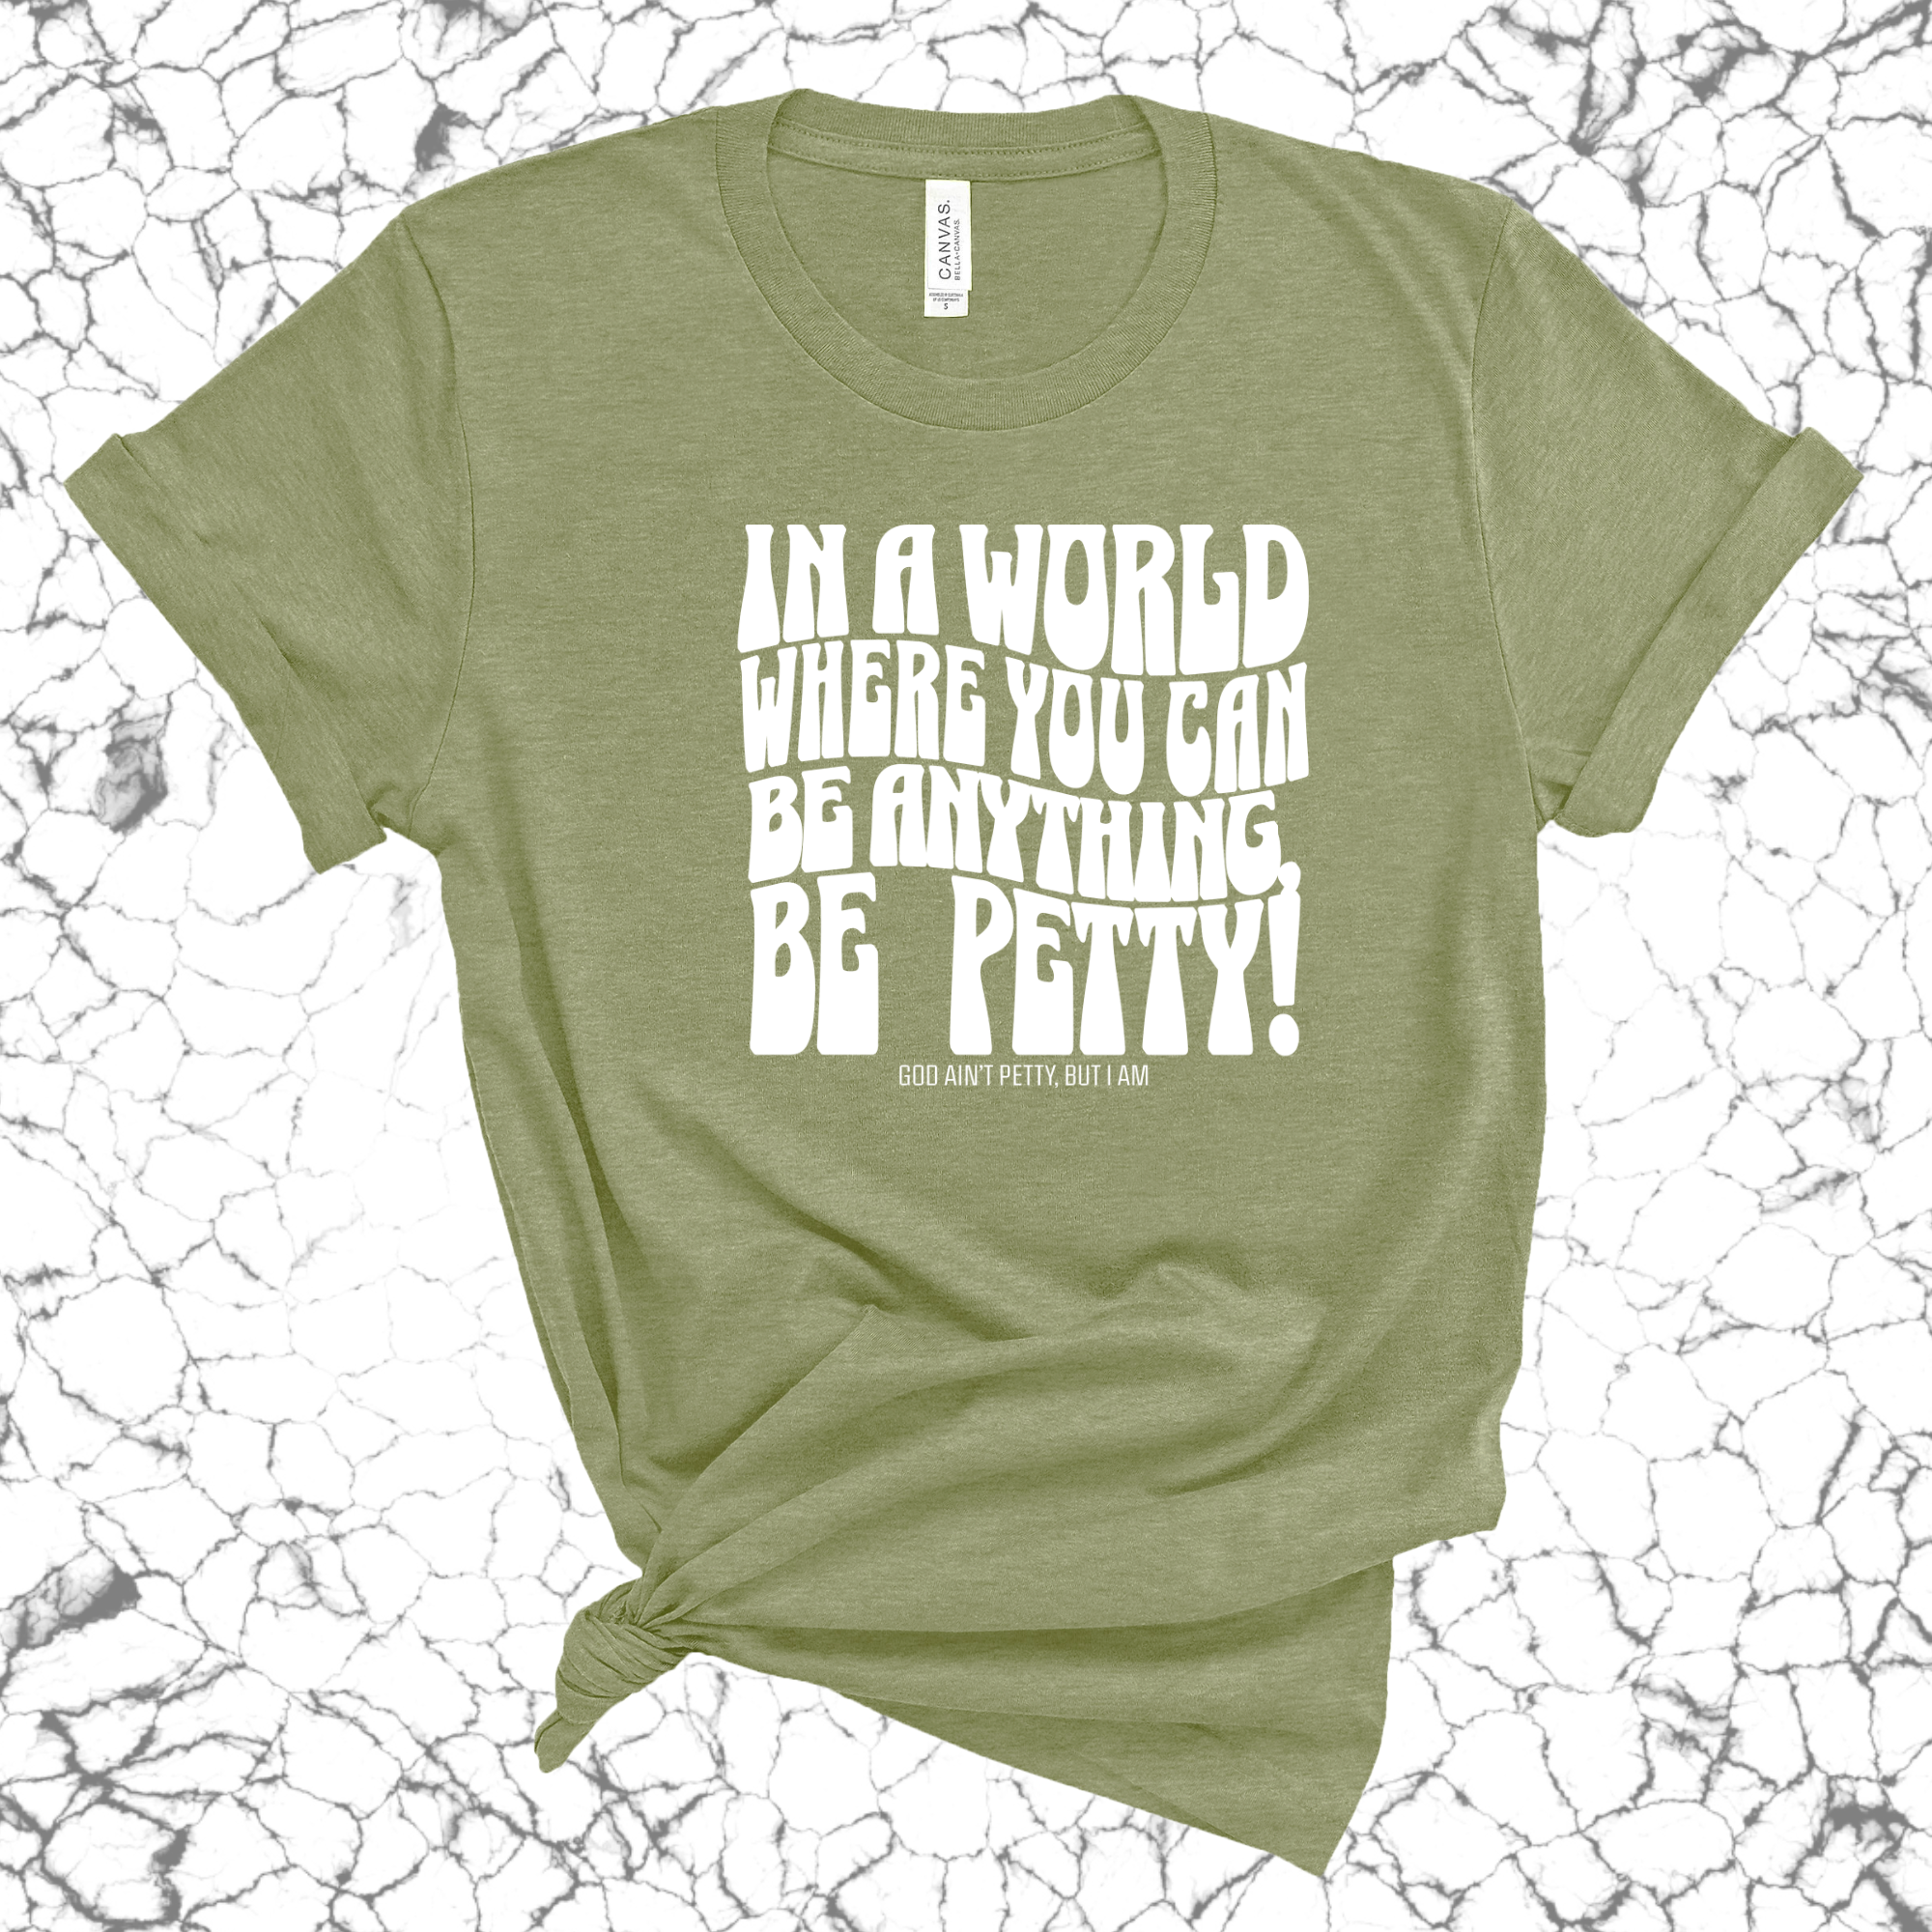 In a world where you can be anything, BE PETTY Unisex Tee (MILITARY GREEN/WHITE)-T-Shirt-The Original God Ain't Petty But I Am